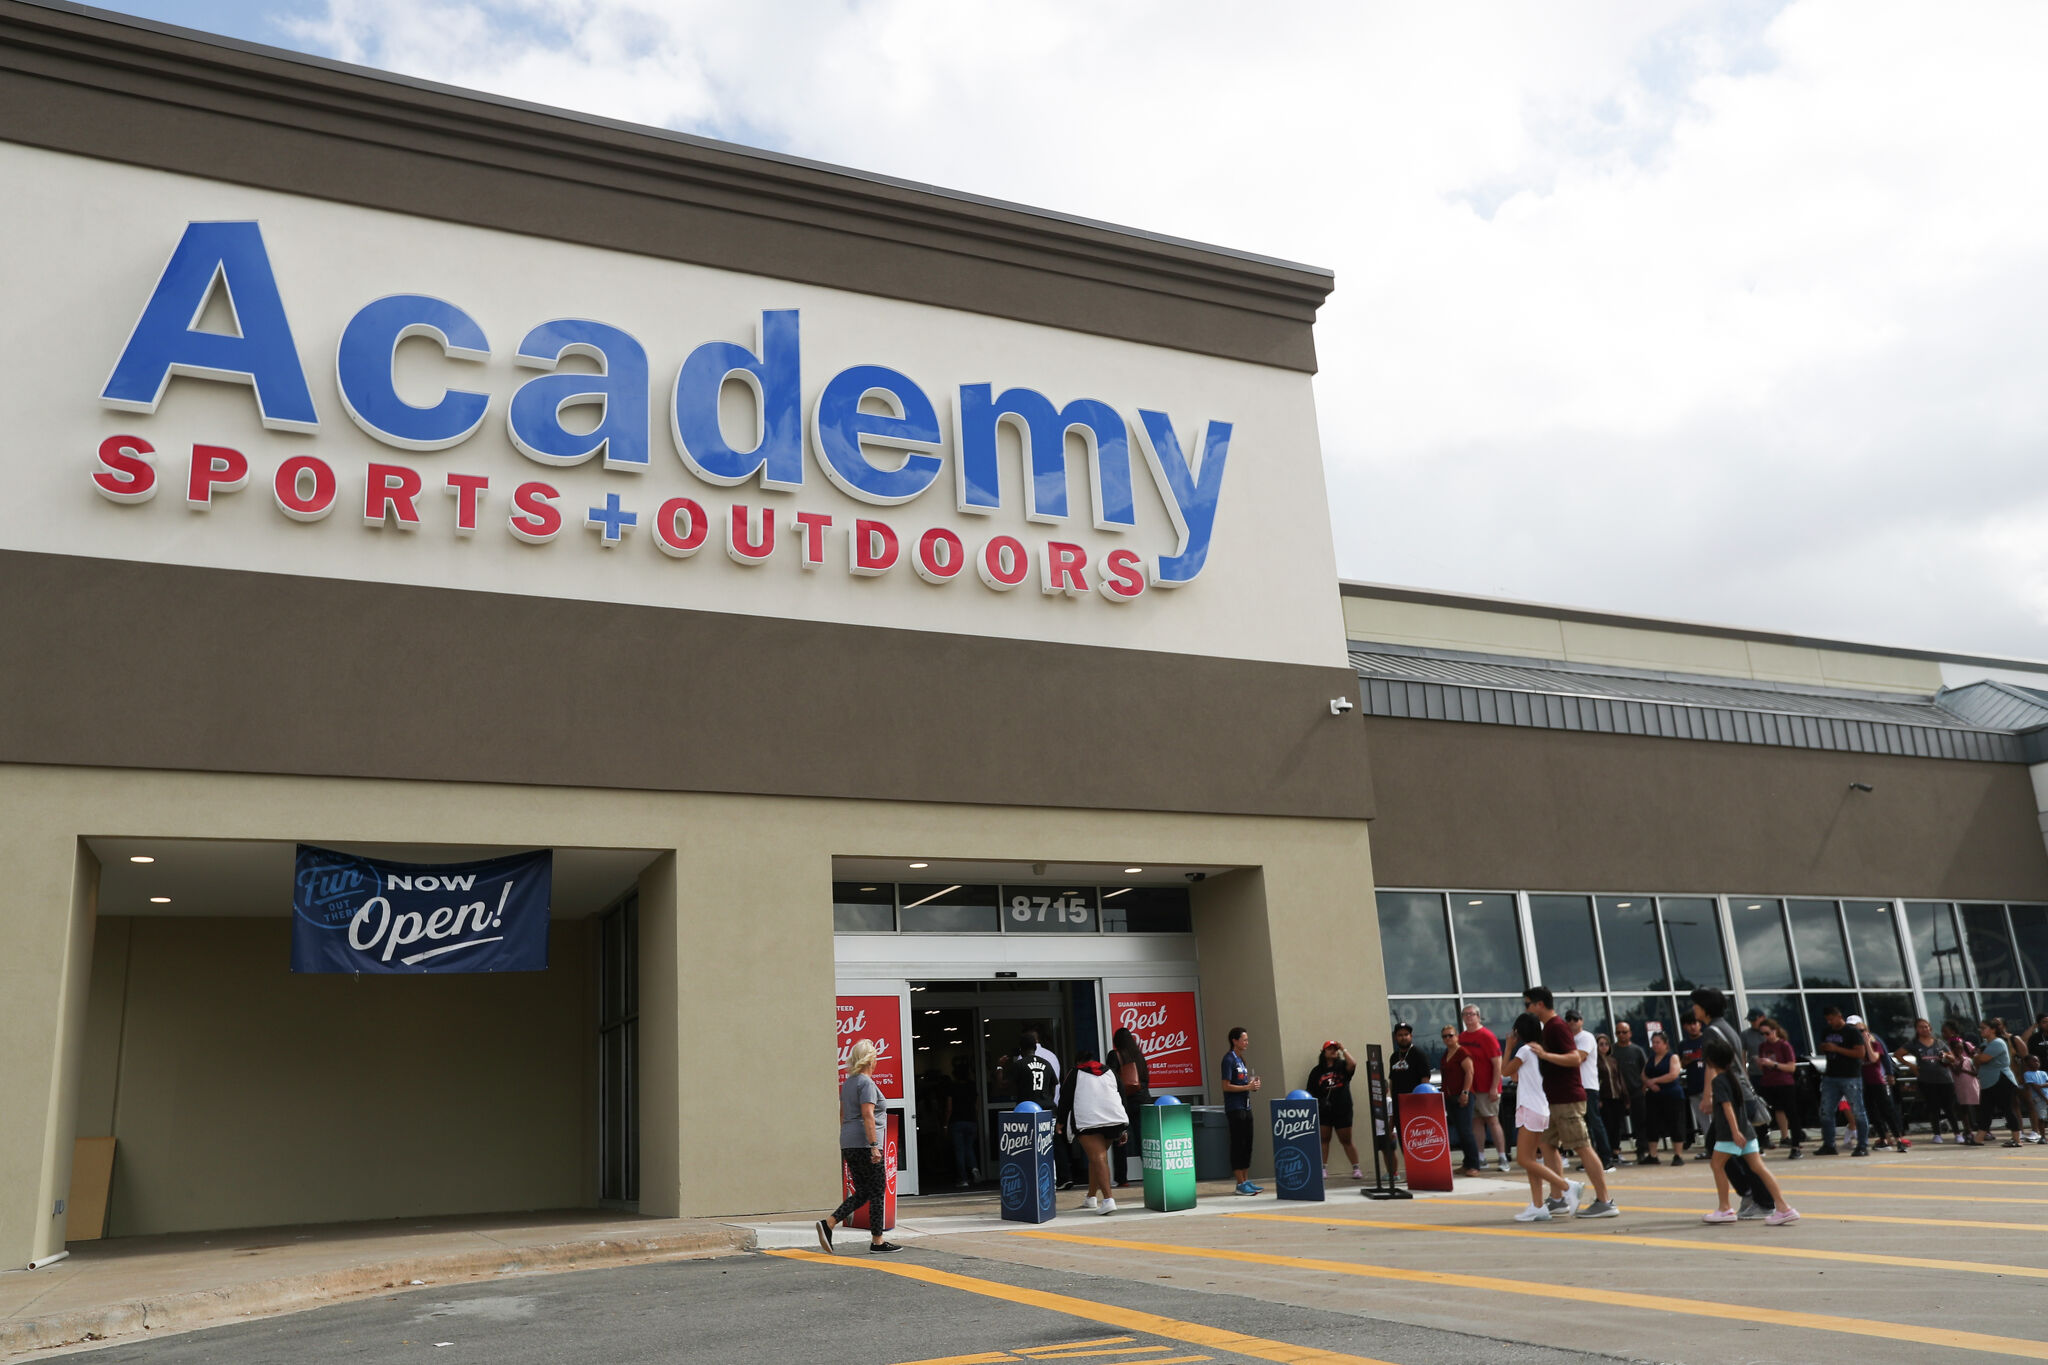 academy sports and outdoors